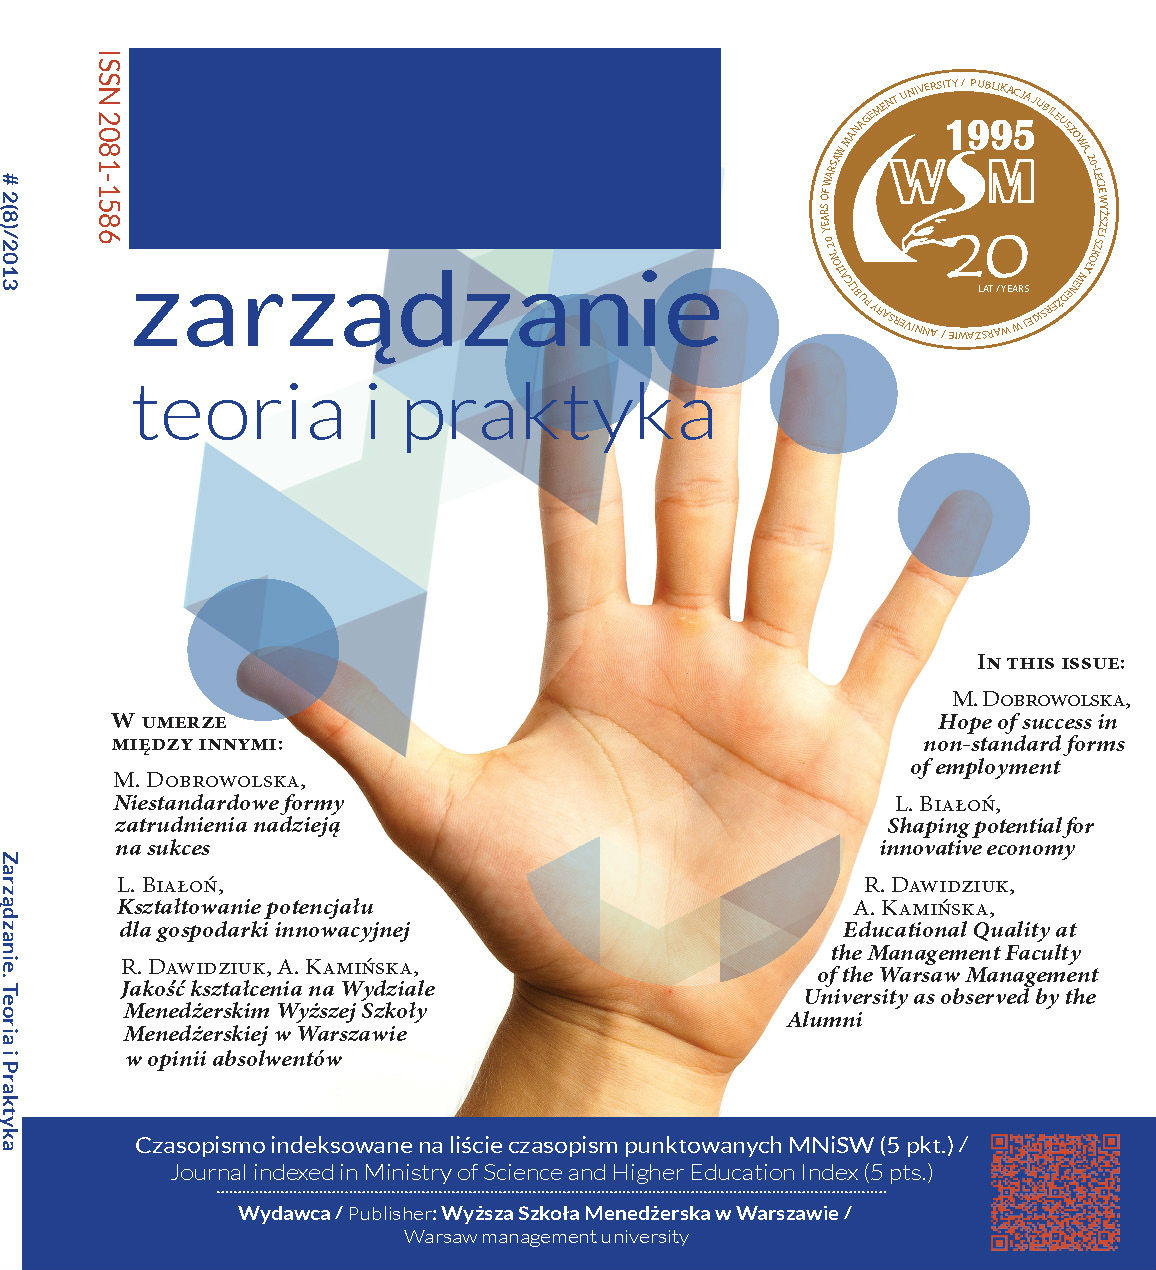 POTENTIAL OF EMPLOYERS FROM LESSER POLAND 
IN THE USE OF FLEXIBLE FORMS OF EMPLOYMENT 
FOR THE AGING STAFF Cover Image